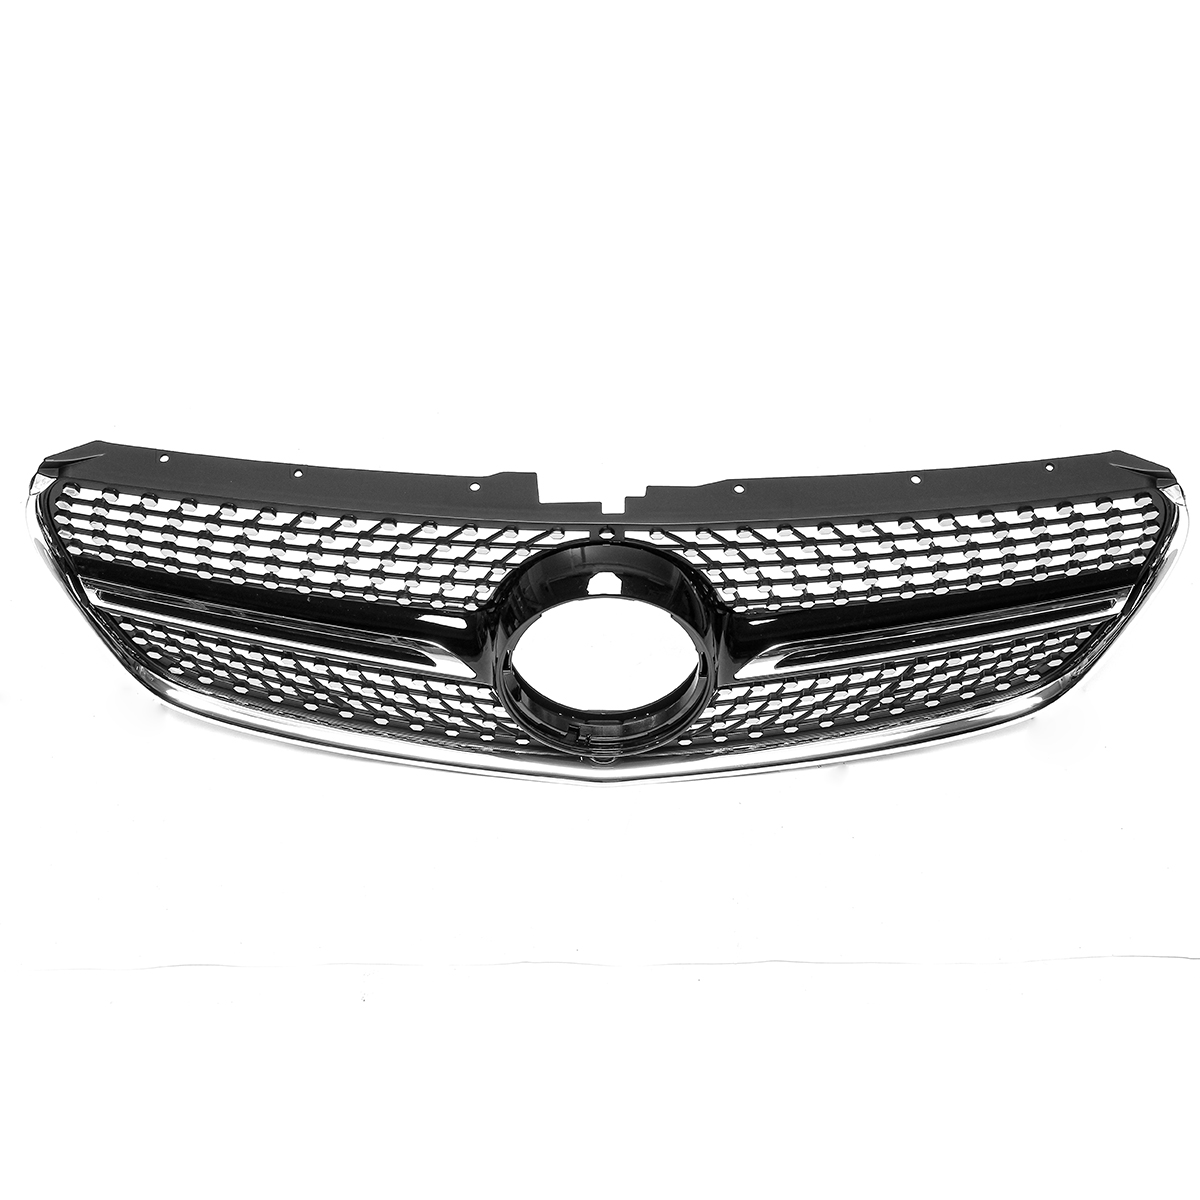 Front Black Racing Diamond Grill Bumper Grille Cover for Mercedes W447 V250 V260 15-18